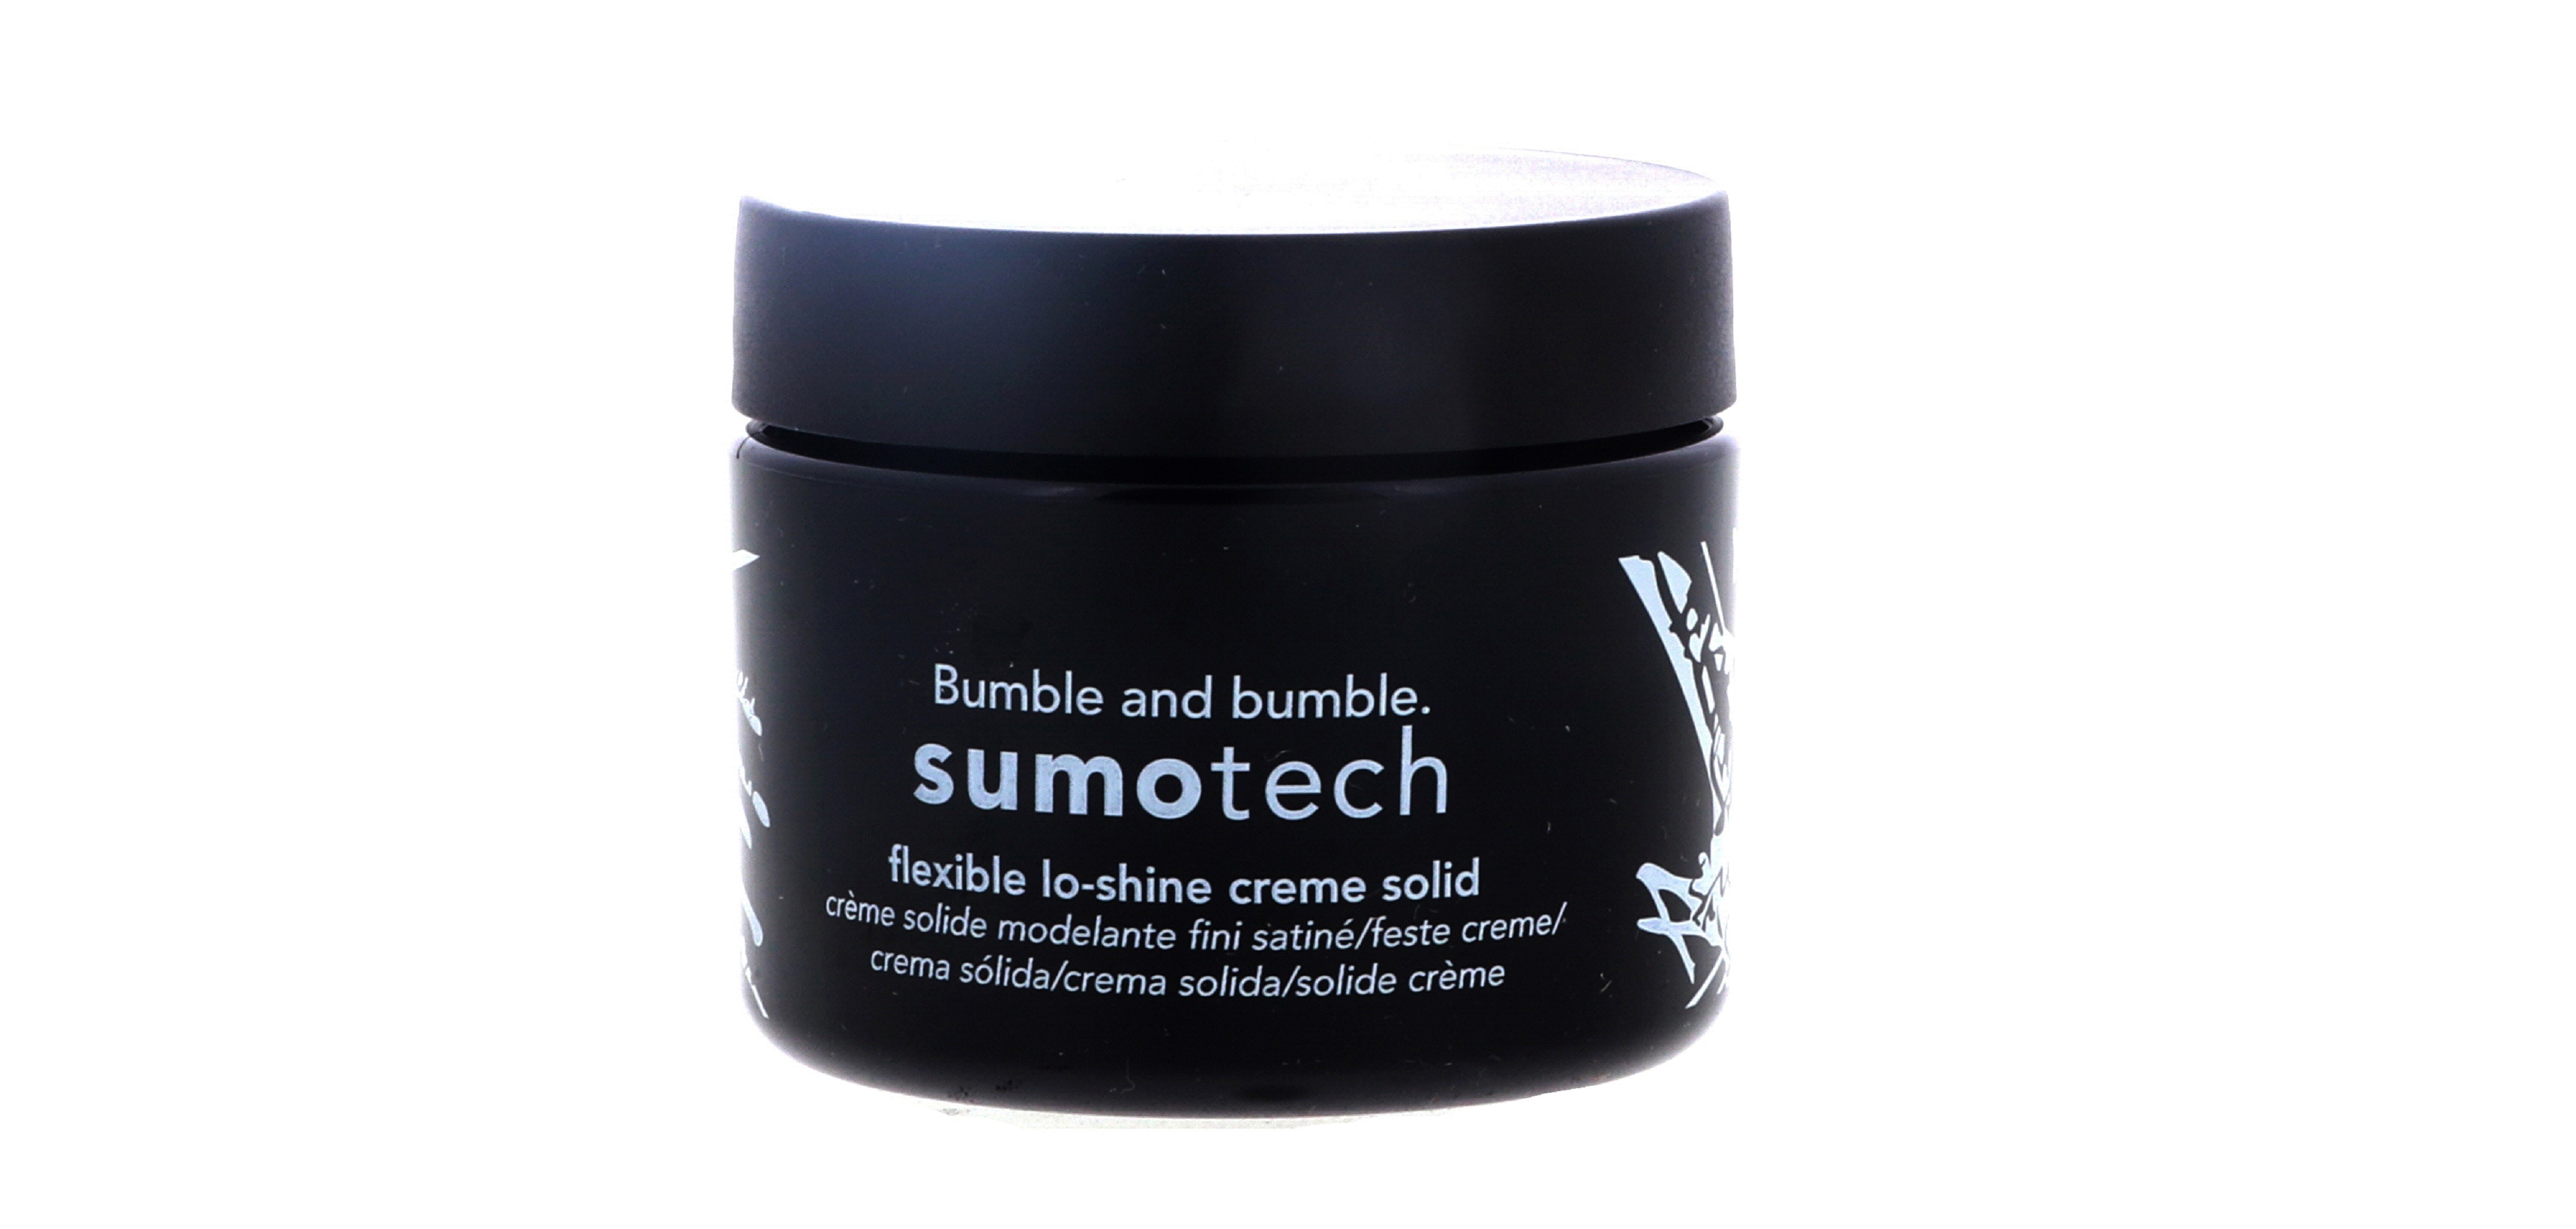 Bumble and Bumble Sumo Tech Creme, 1.5 oz 2 Pack - image 3 of 4